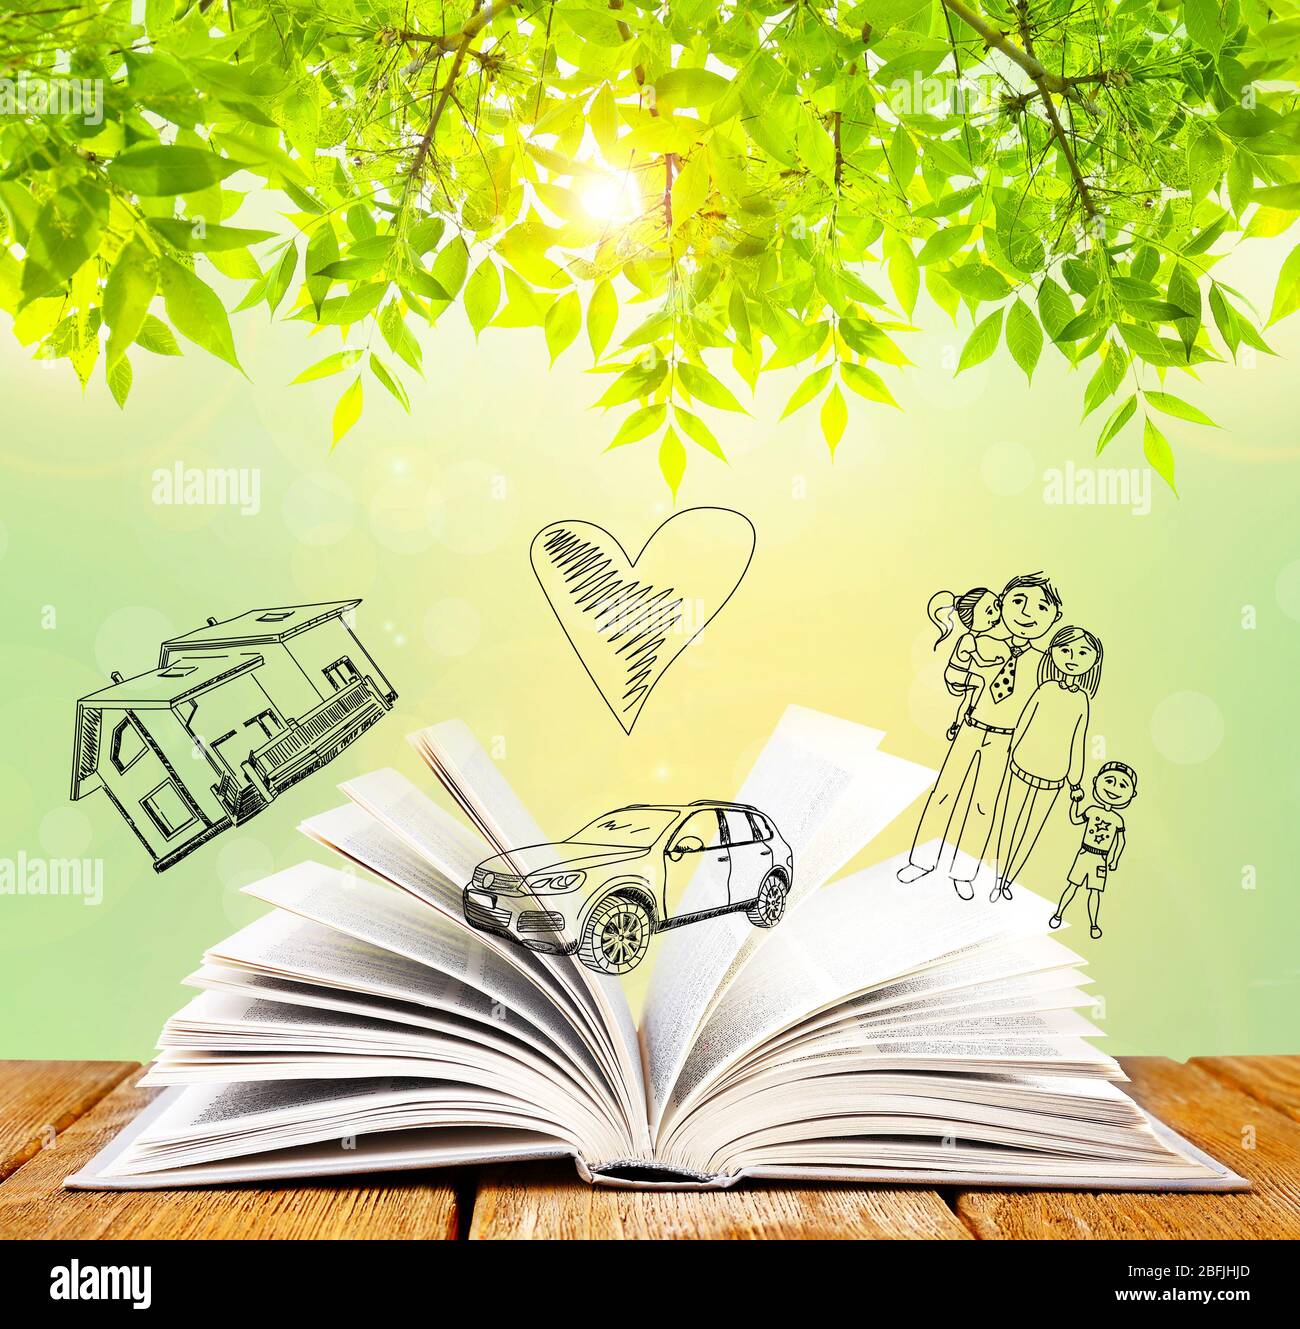 Open book with drawings on nature background Stock Photo